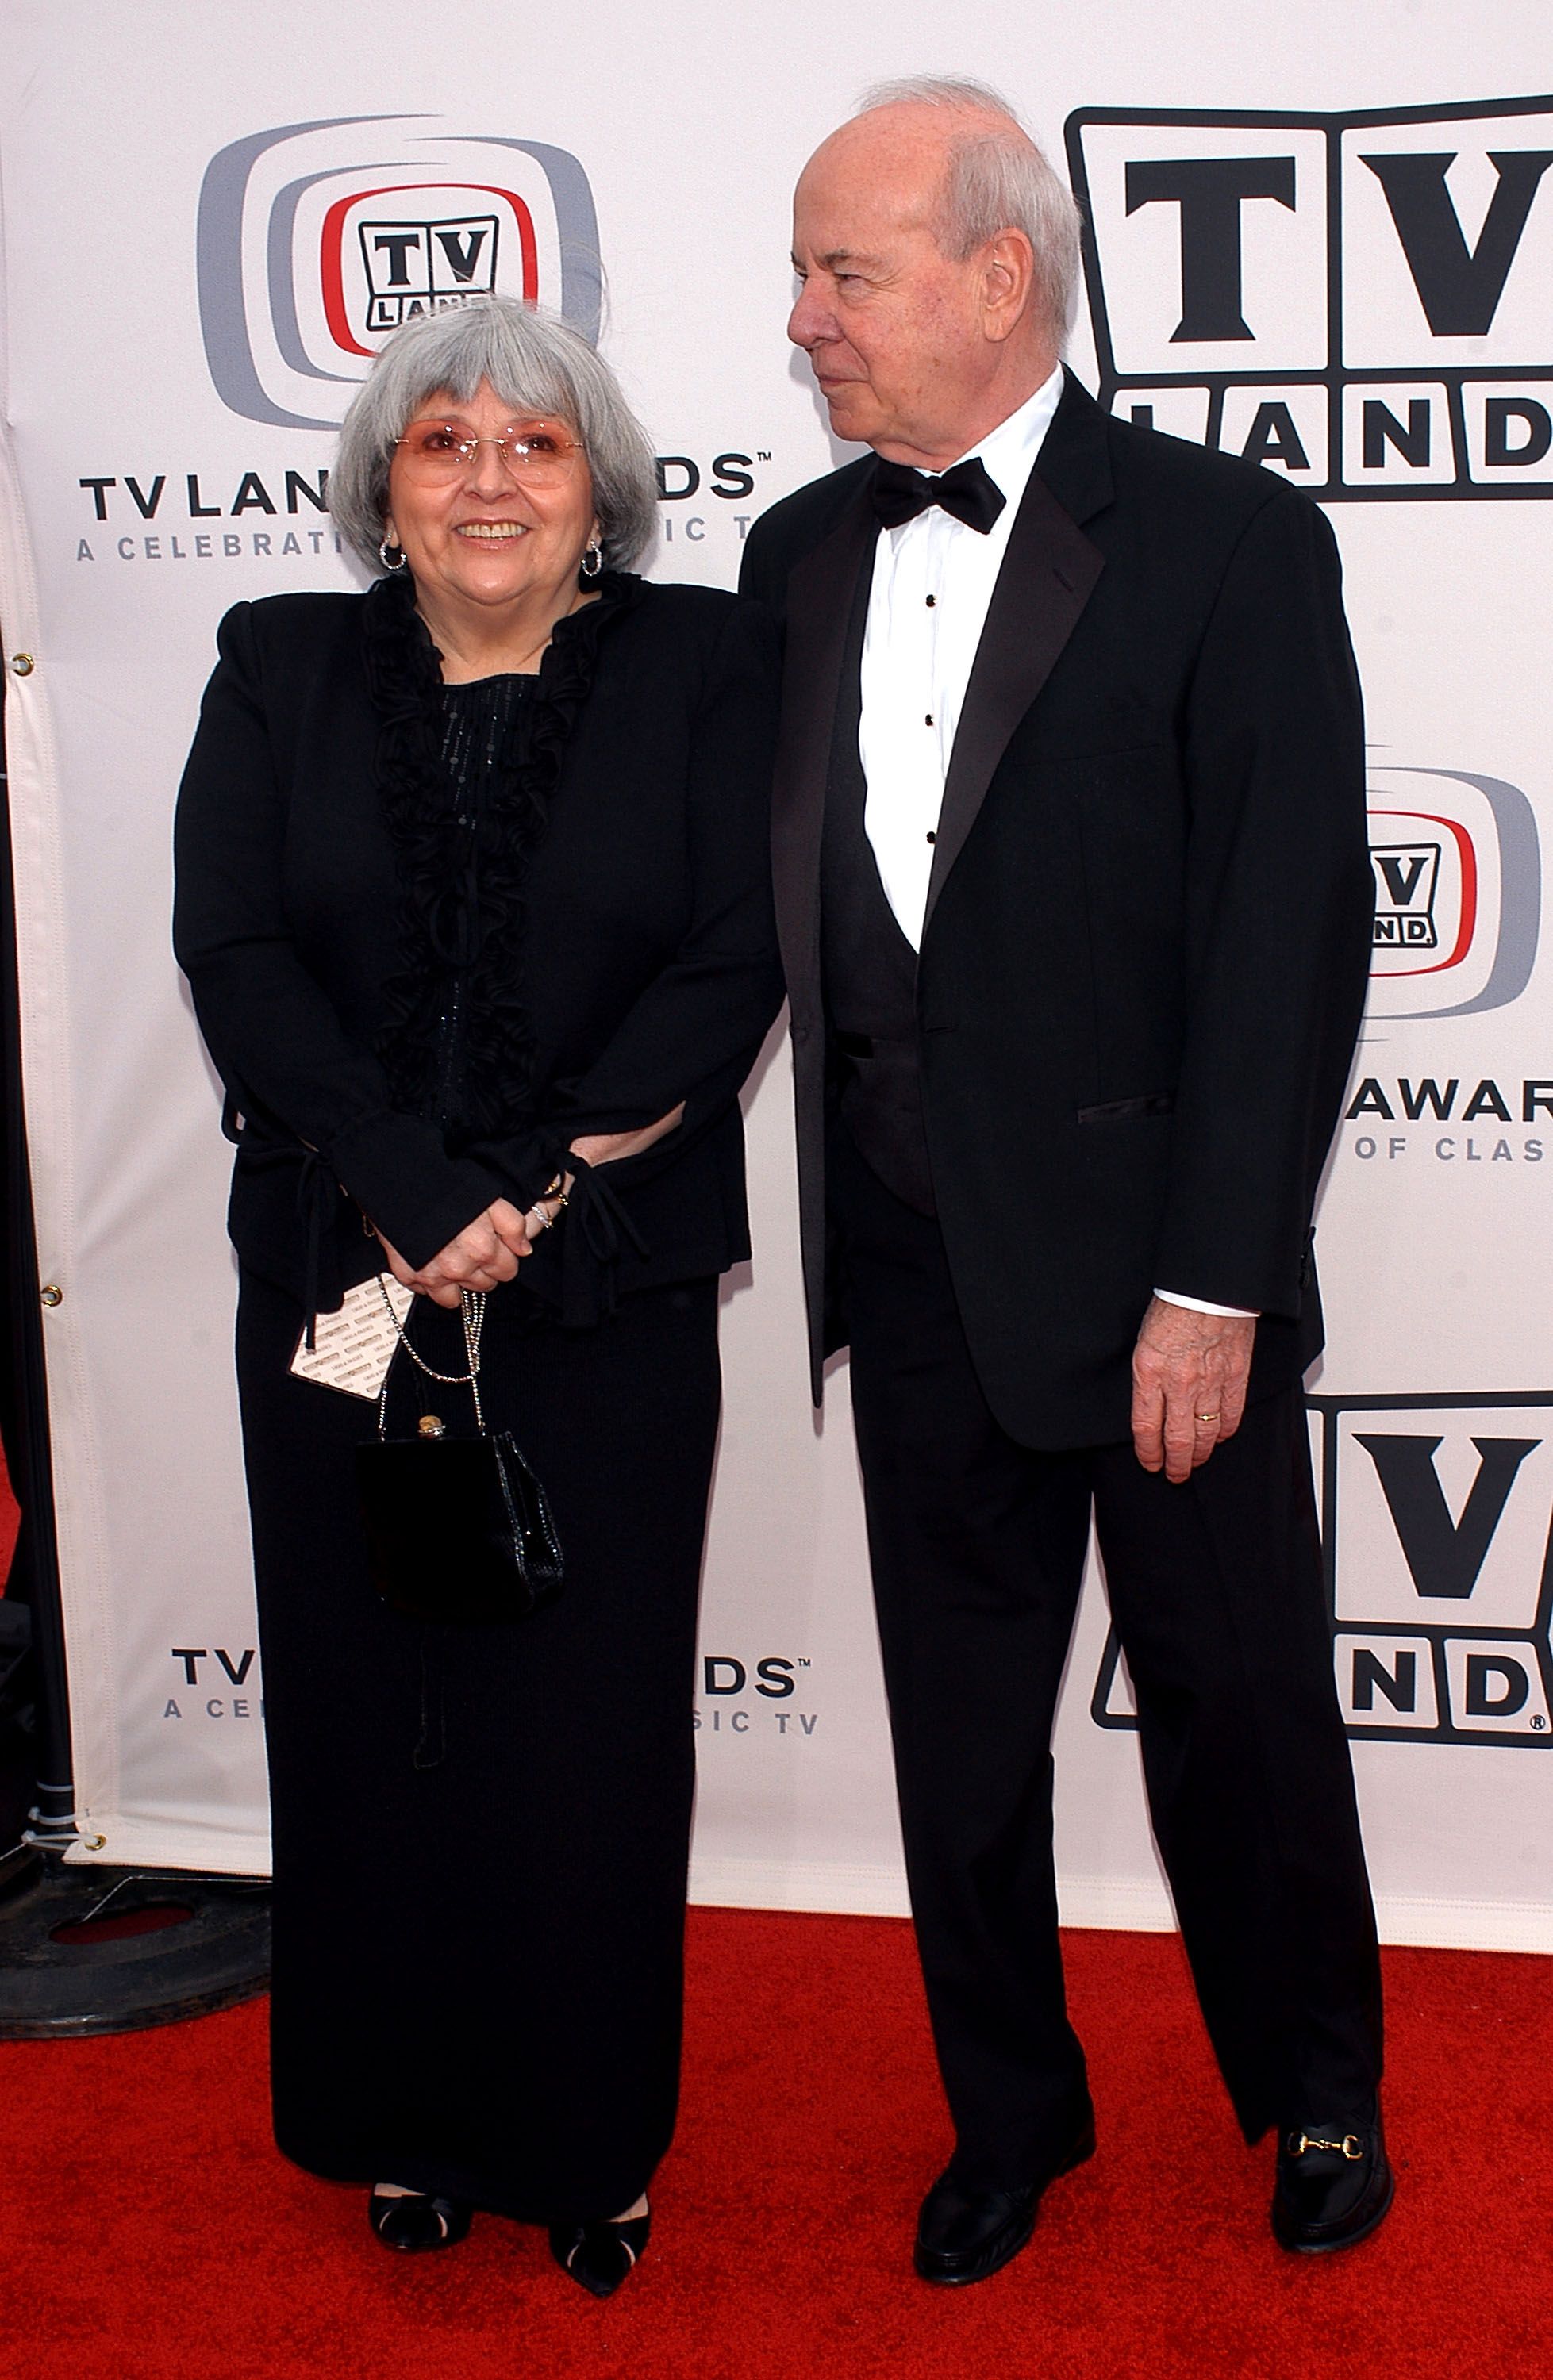 Charlene Fusso and Tim Conway at the TV Land Awards at Barker Hangar on March 13, 2005, in Santa Monica, California | Photo: Stephen Shugerman/Getty Images